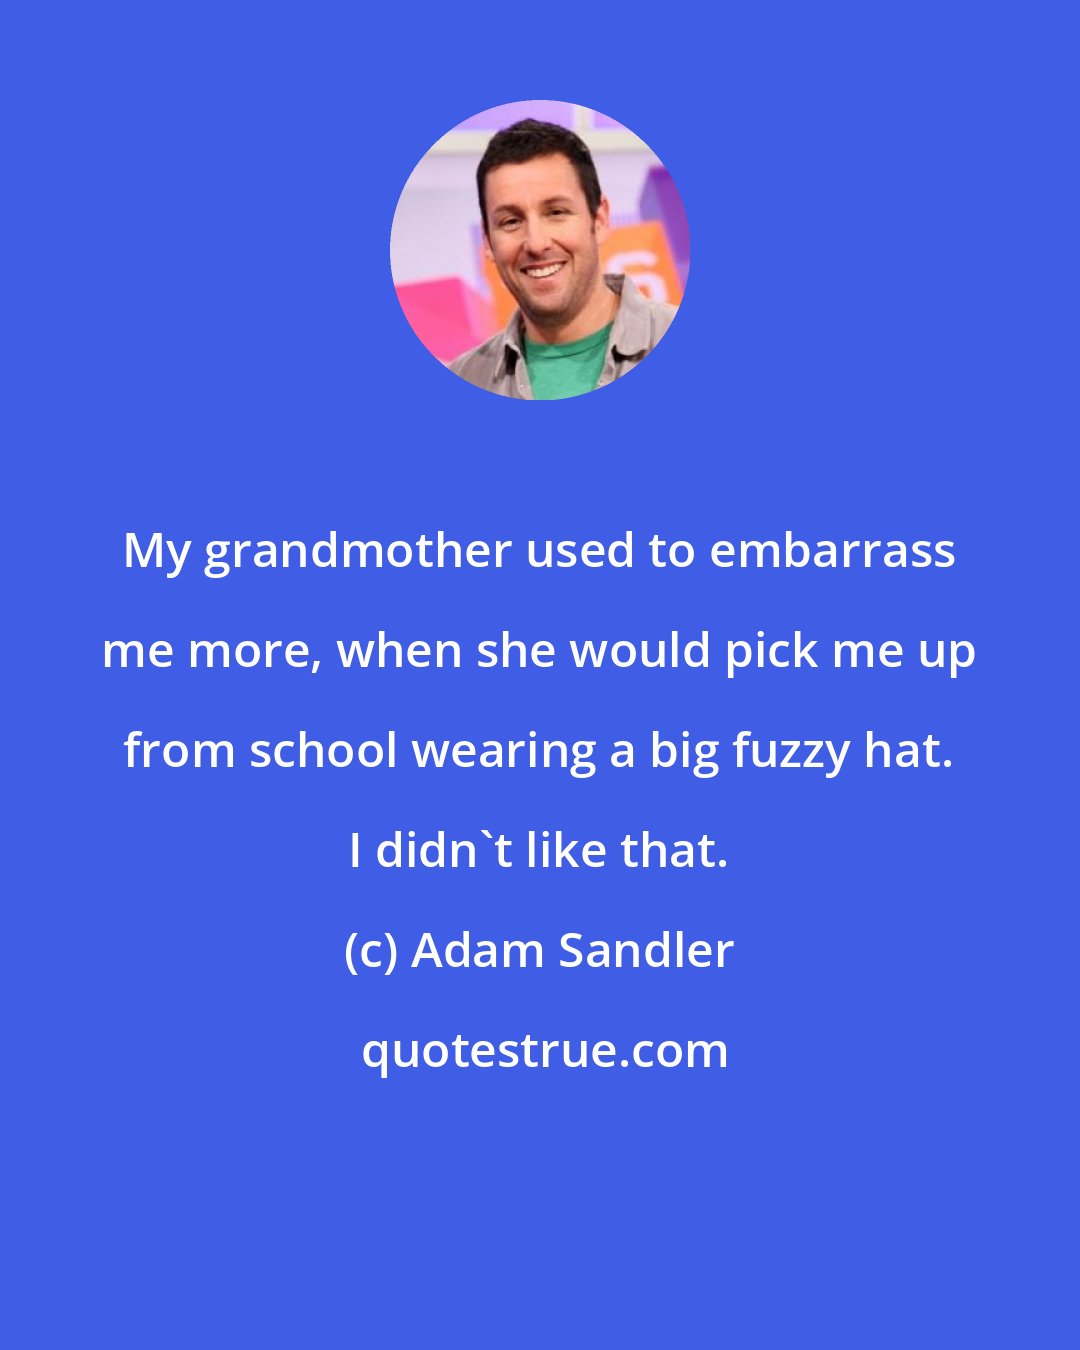 Adam Sandler: My grandmother used to embarrass me more, when she would pick me up from school wearing a big fuzzy hat. I didn't like that.